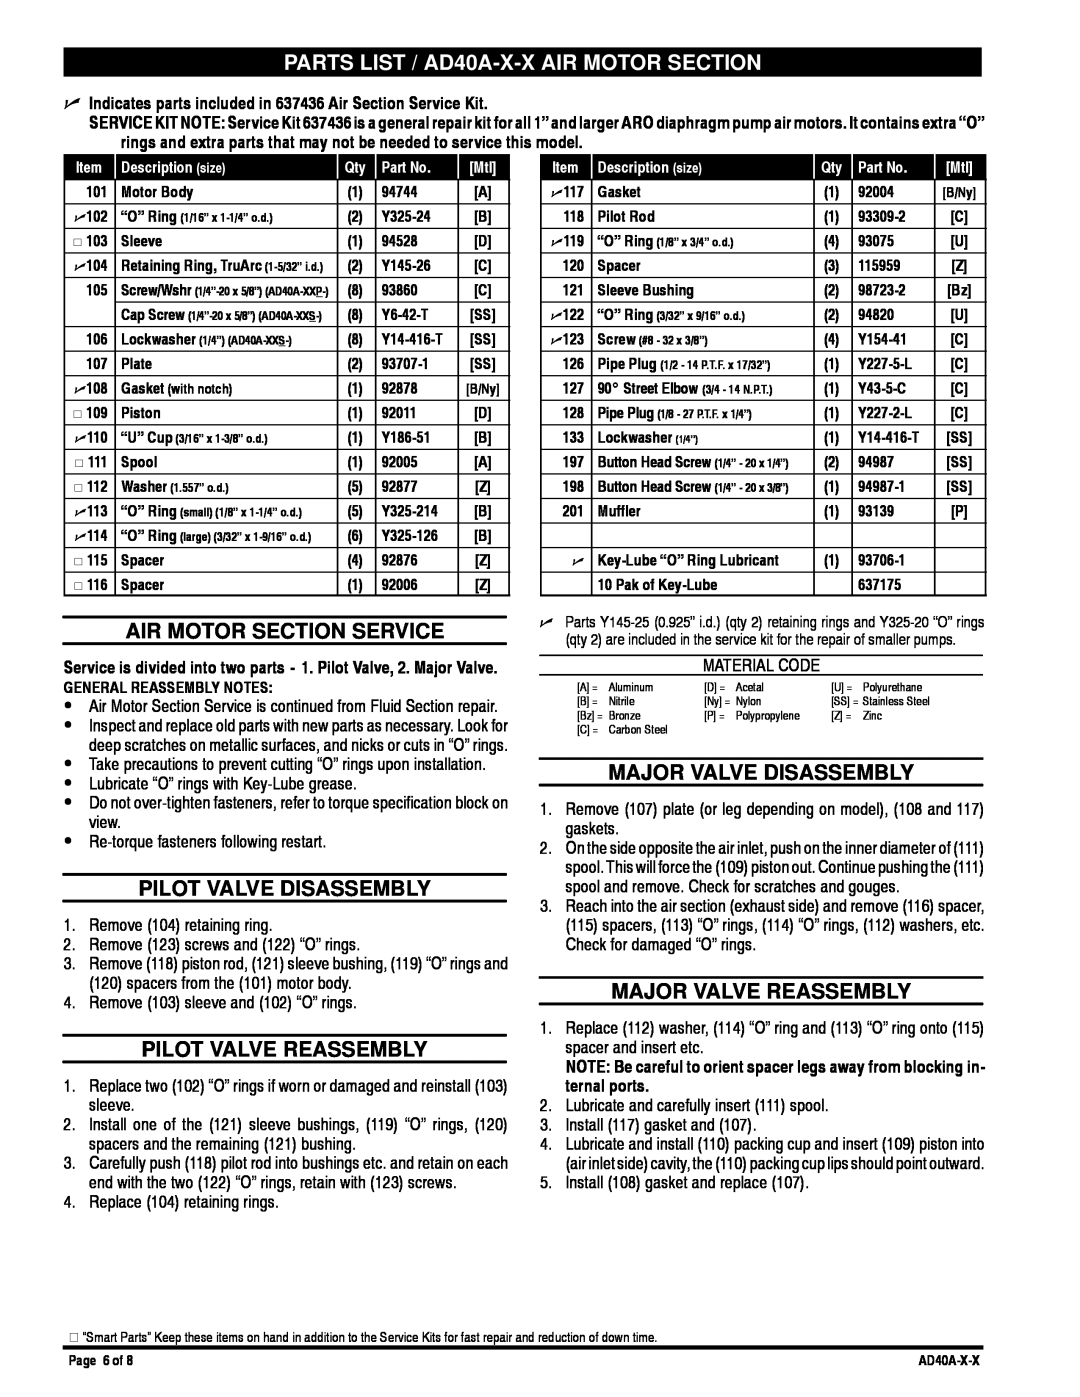 Ingersoll-Rand manual PARTS LIST / AD40A-X-XAIR MOTOR SECTION, Air Motor Section Service, Pilot Valve Disassembly 